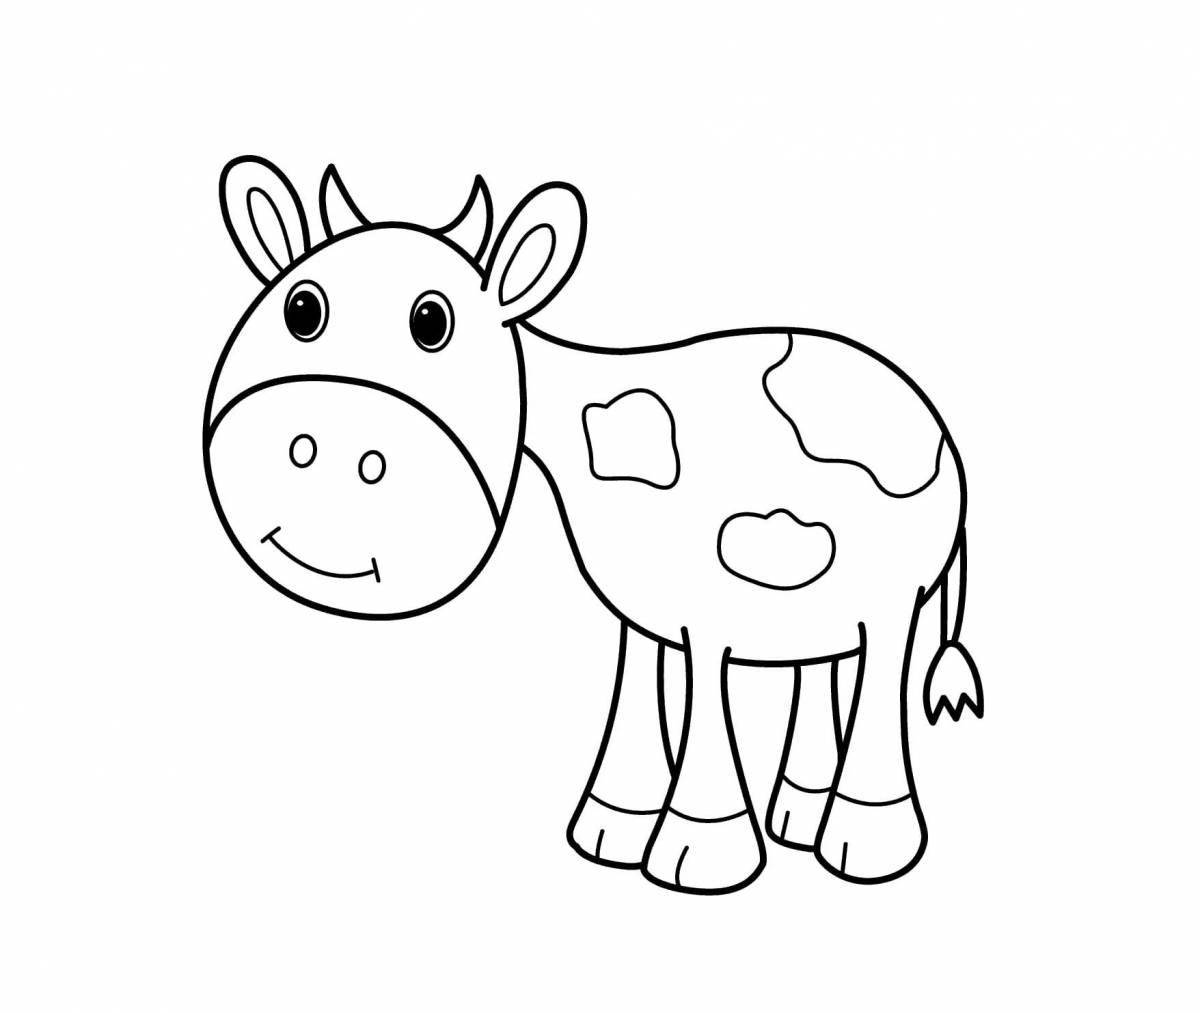 Fascinating cow drawing for kids